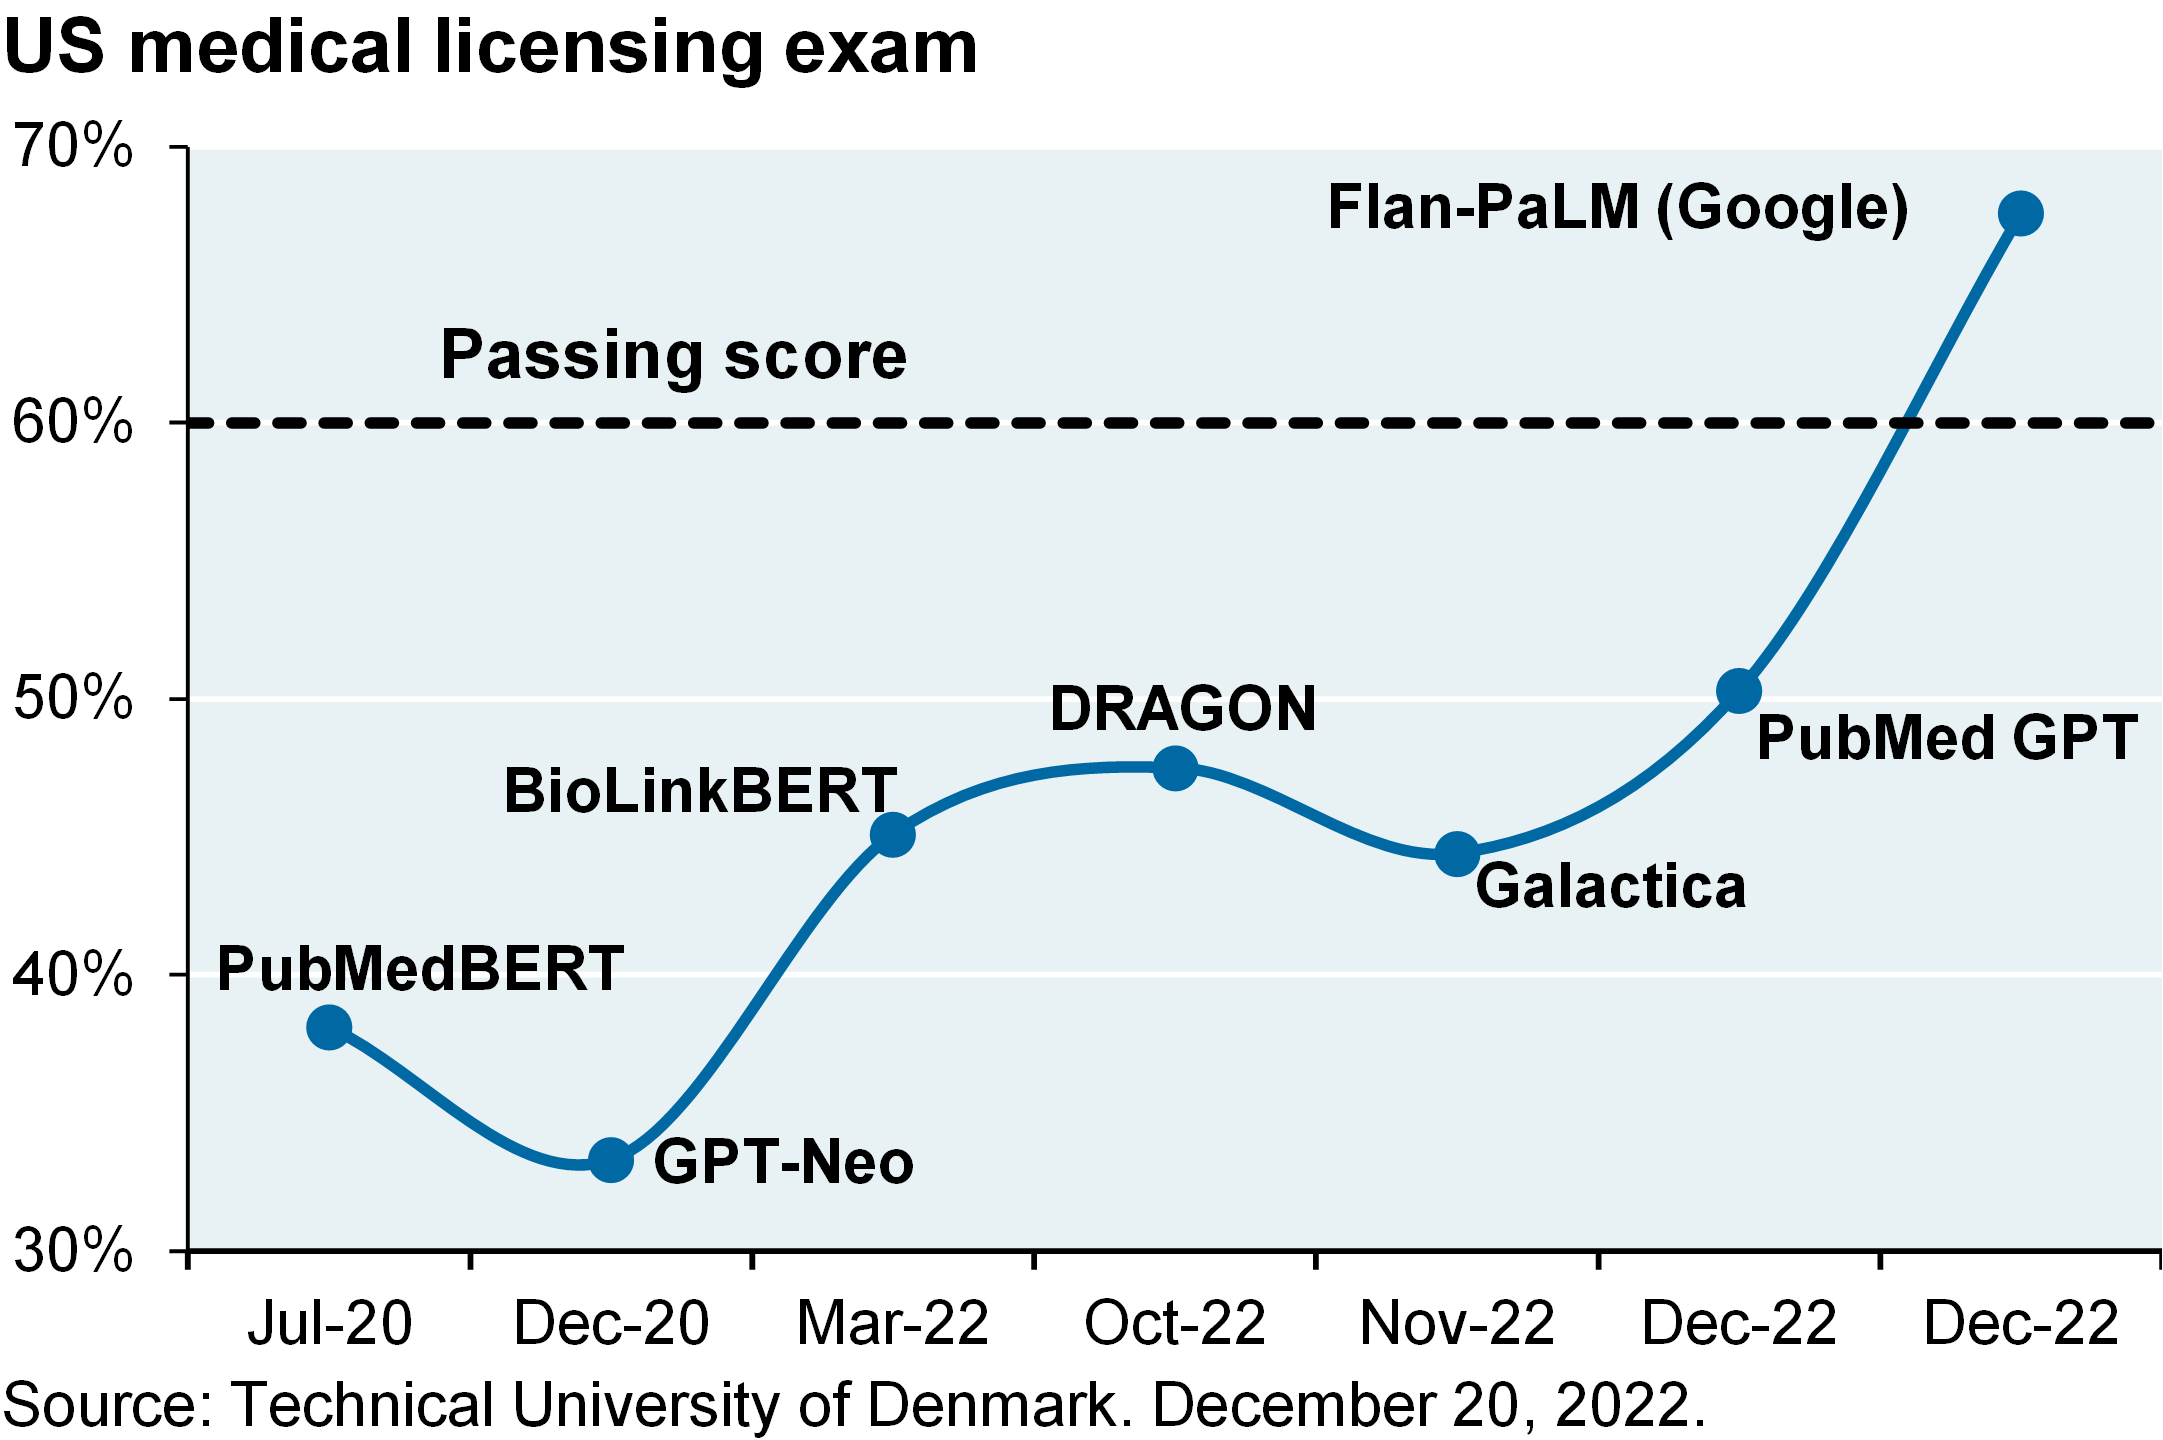 Line chart displays the scores of seven language learning models on the US medical licensing exam and the date of their examination. Google’s Flan-PaLM was the first model to pass the exam with a score above the passing threshold of 60%.